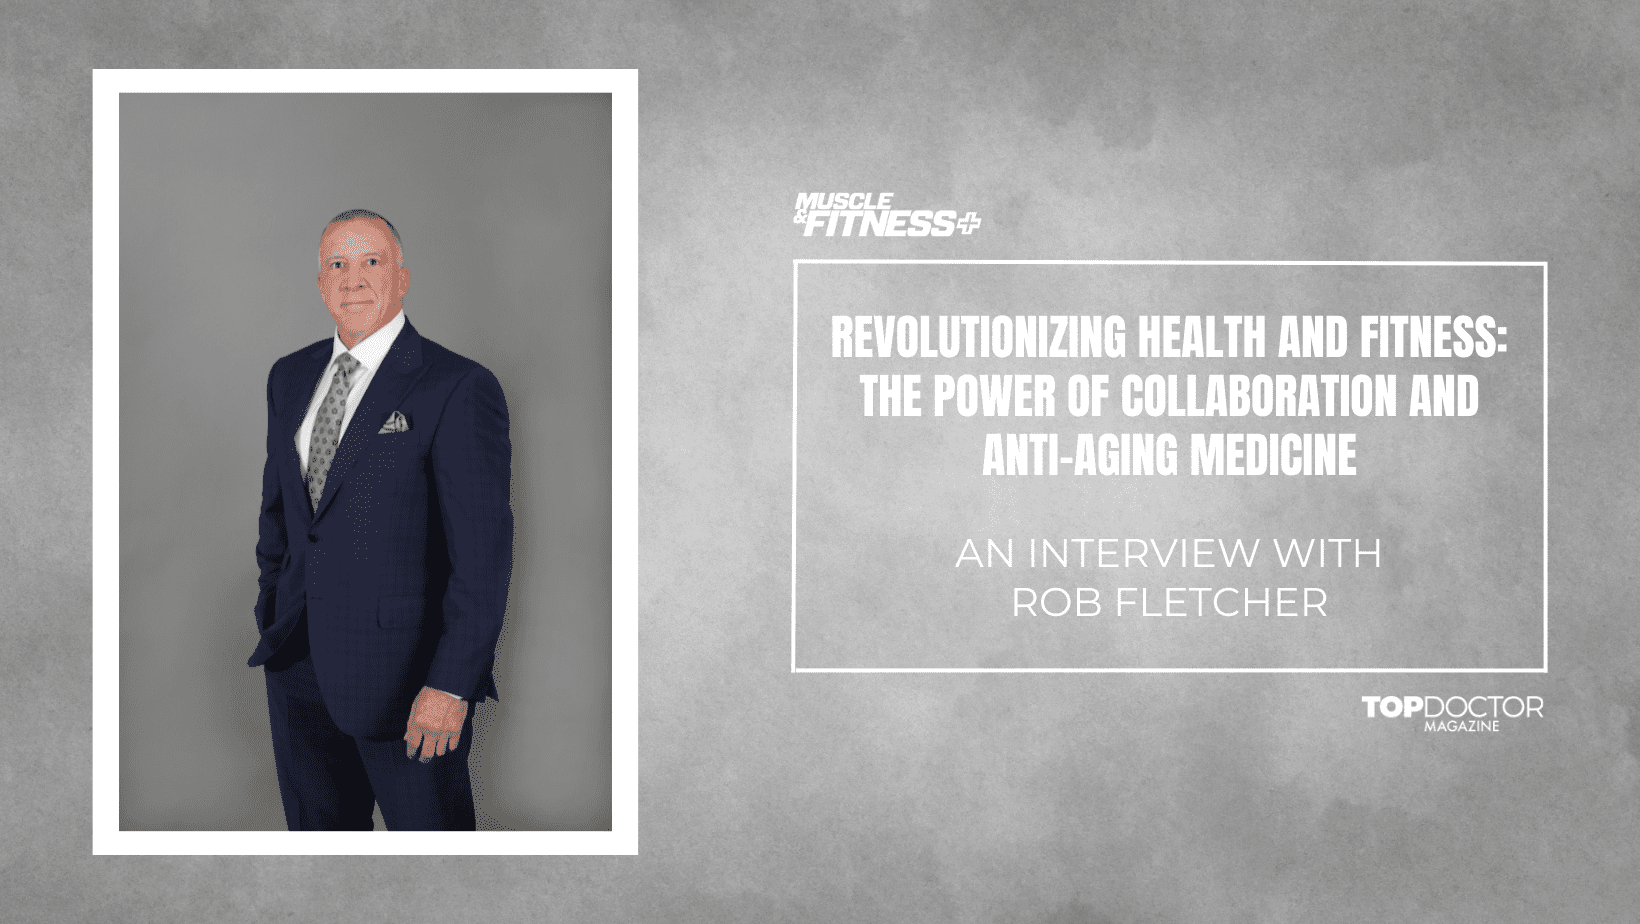 Revolutionizing Health and Fitness: The Power of Collaboration and Anti-Aging Medicine